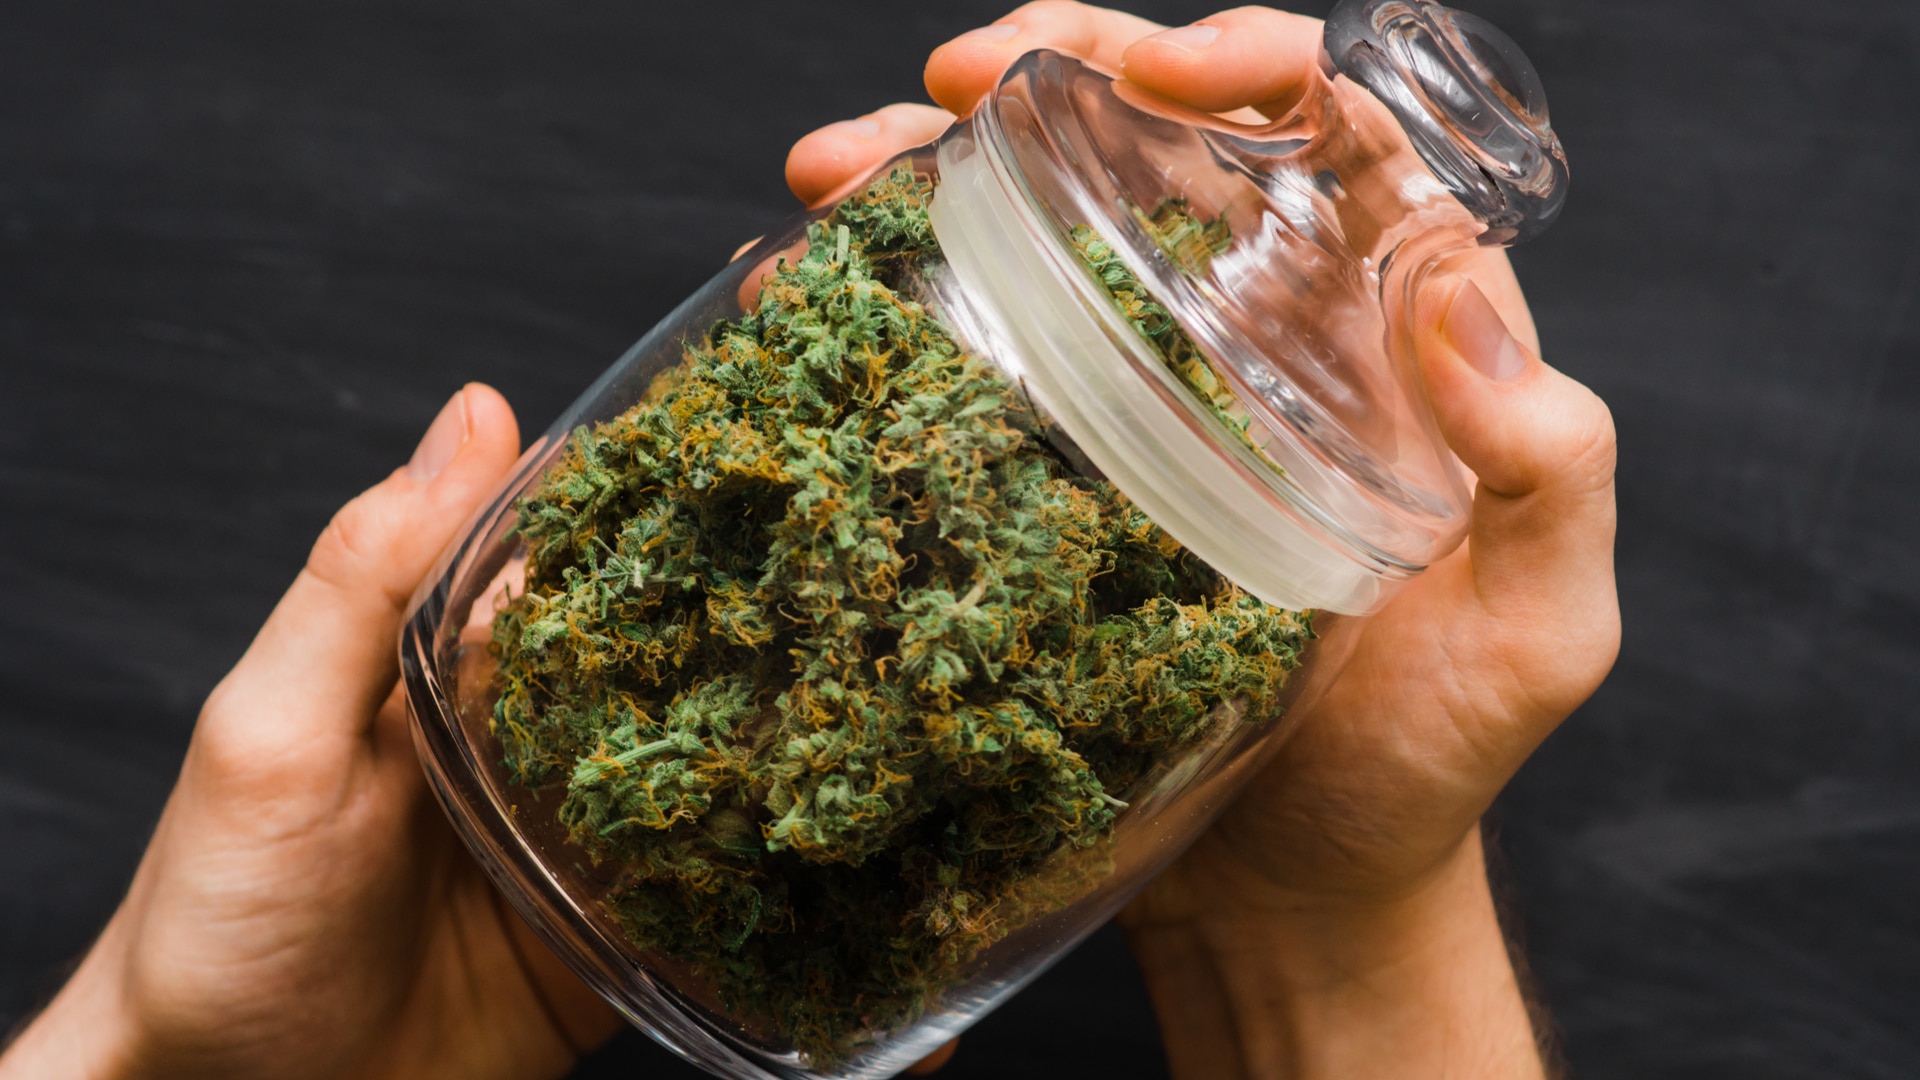 Prices Explained: How Much is an Ounce of Weed